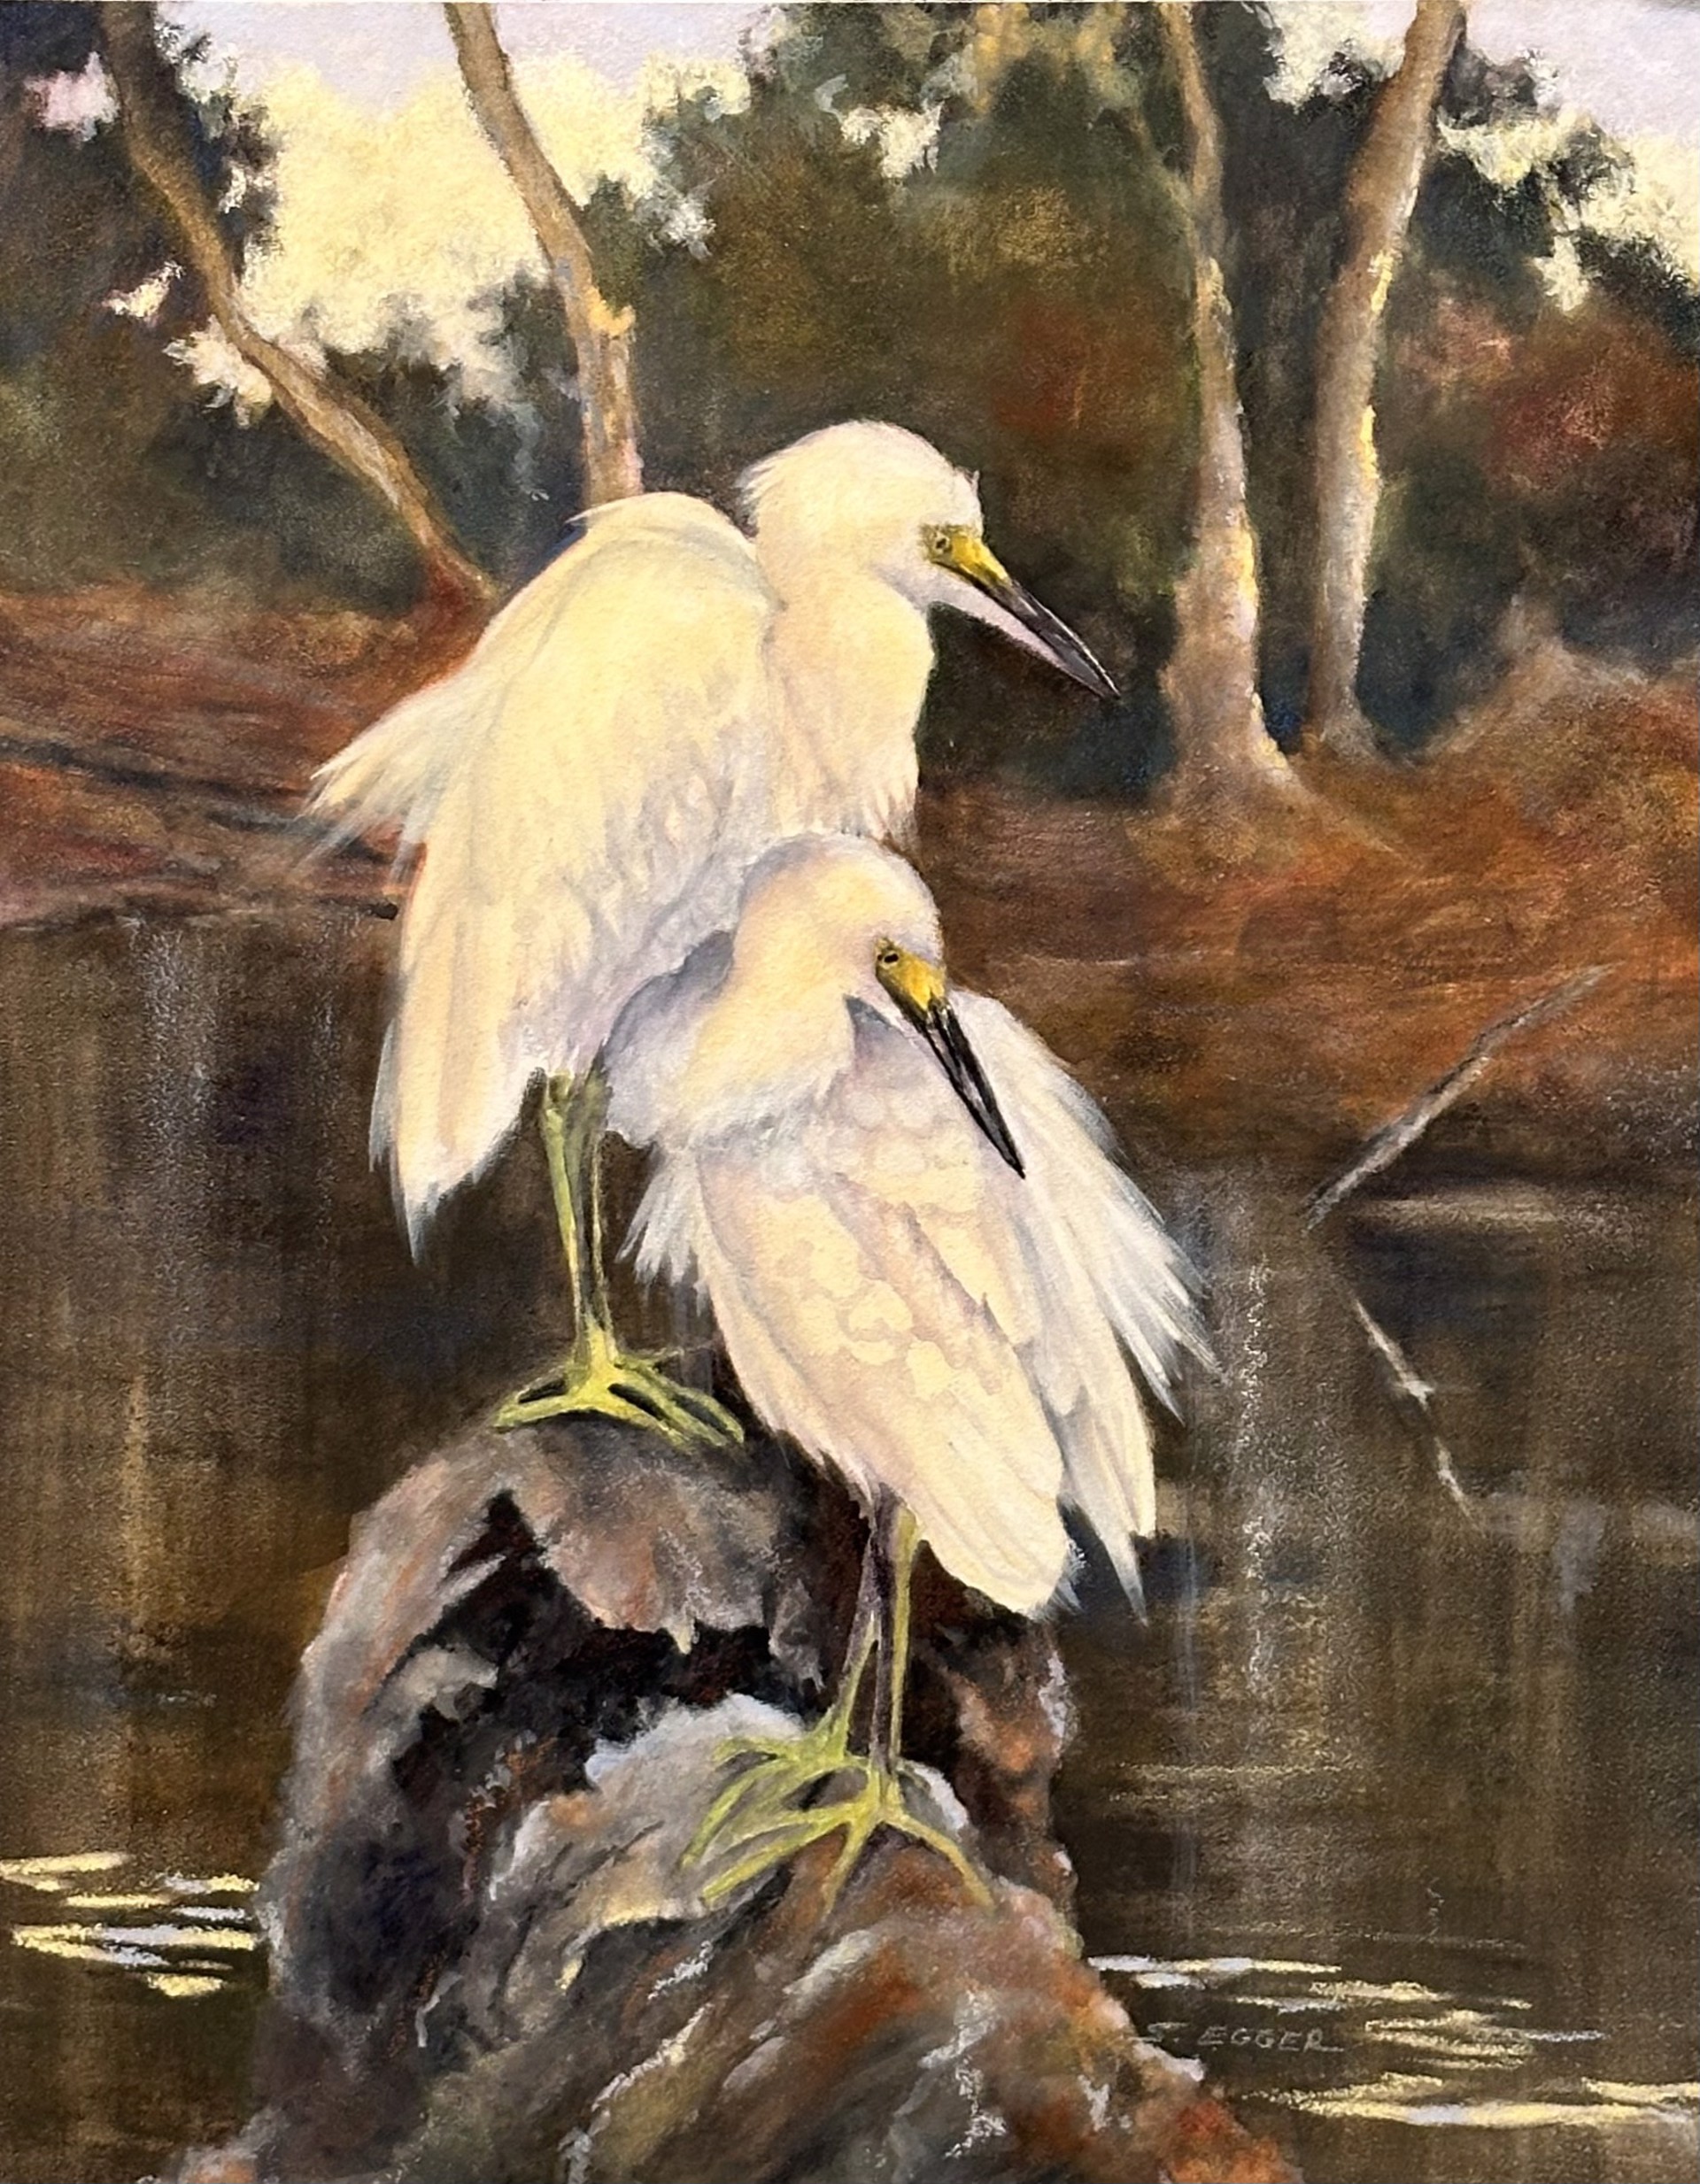 Two Snowy Egrets by Sherry Egger